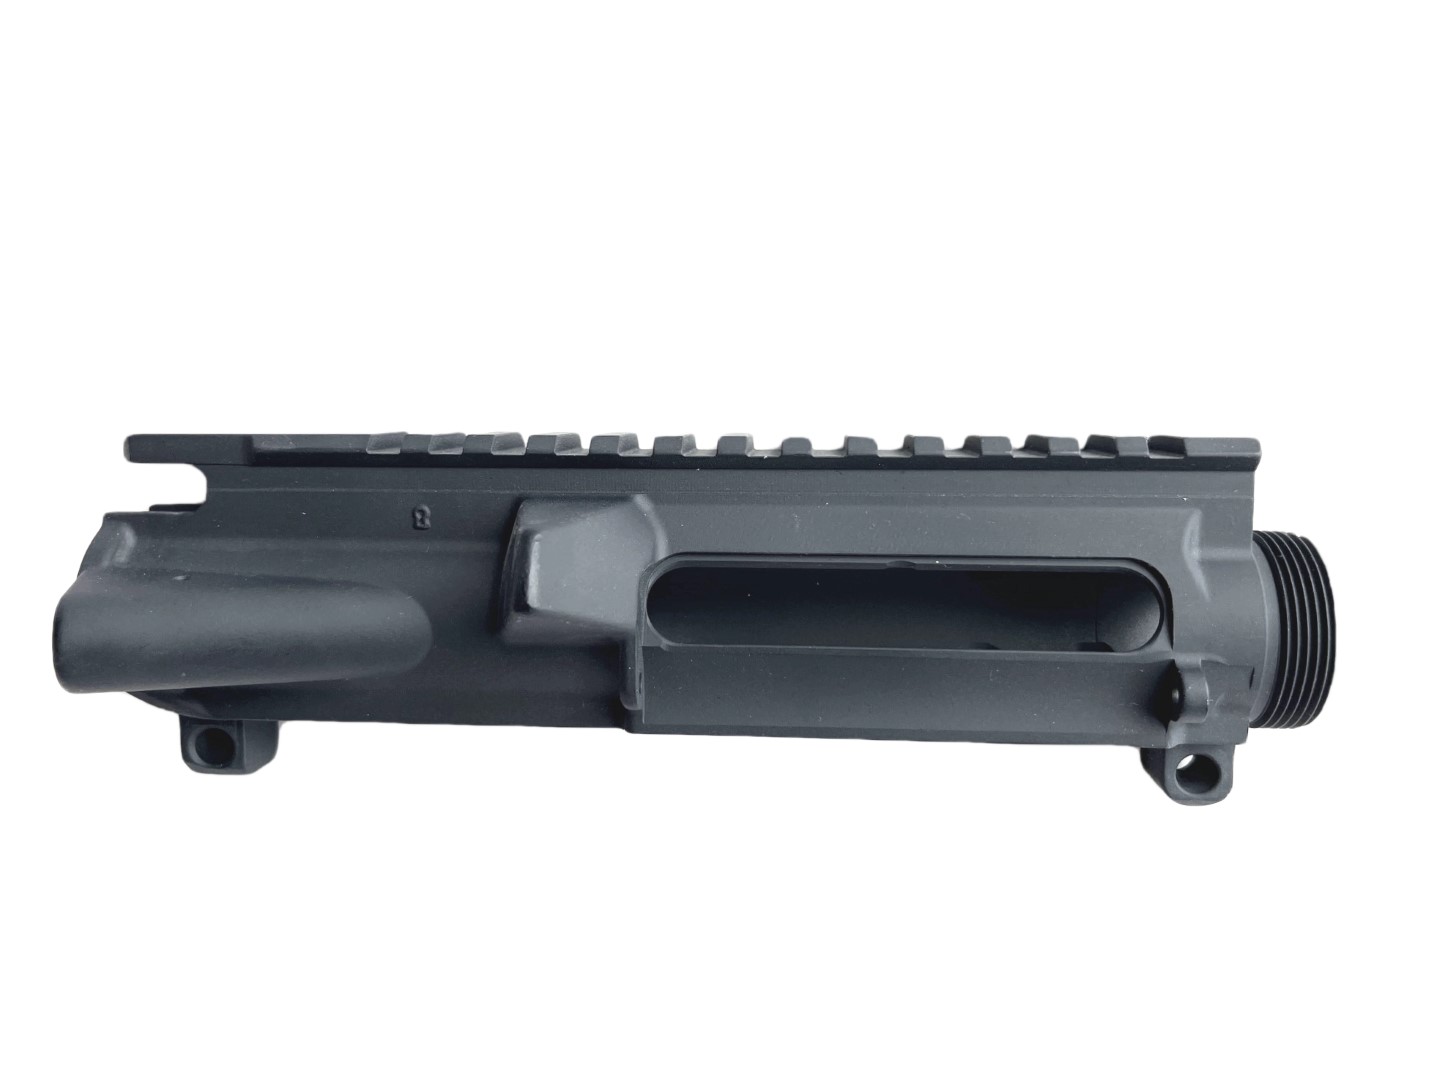 AR-15 Stripped Upper Receiver- Gray Color